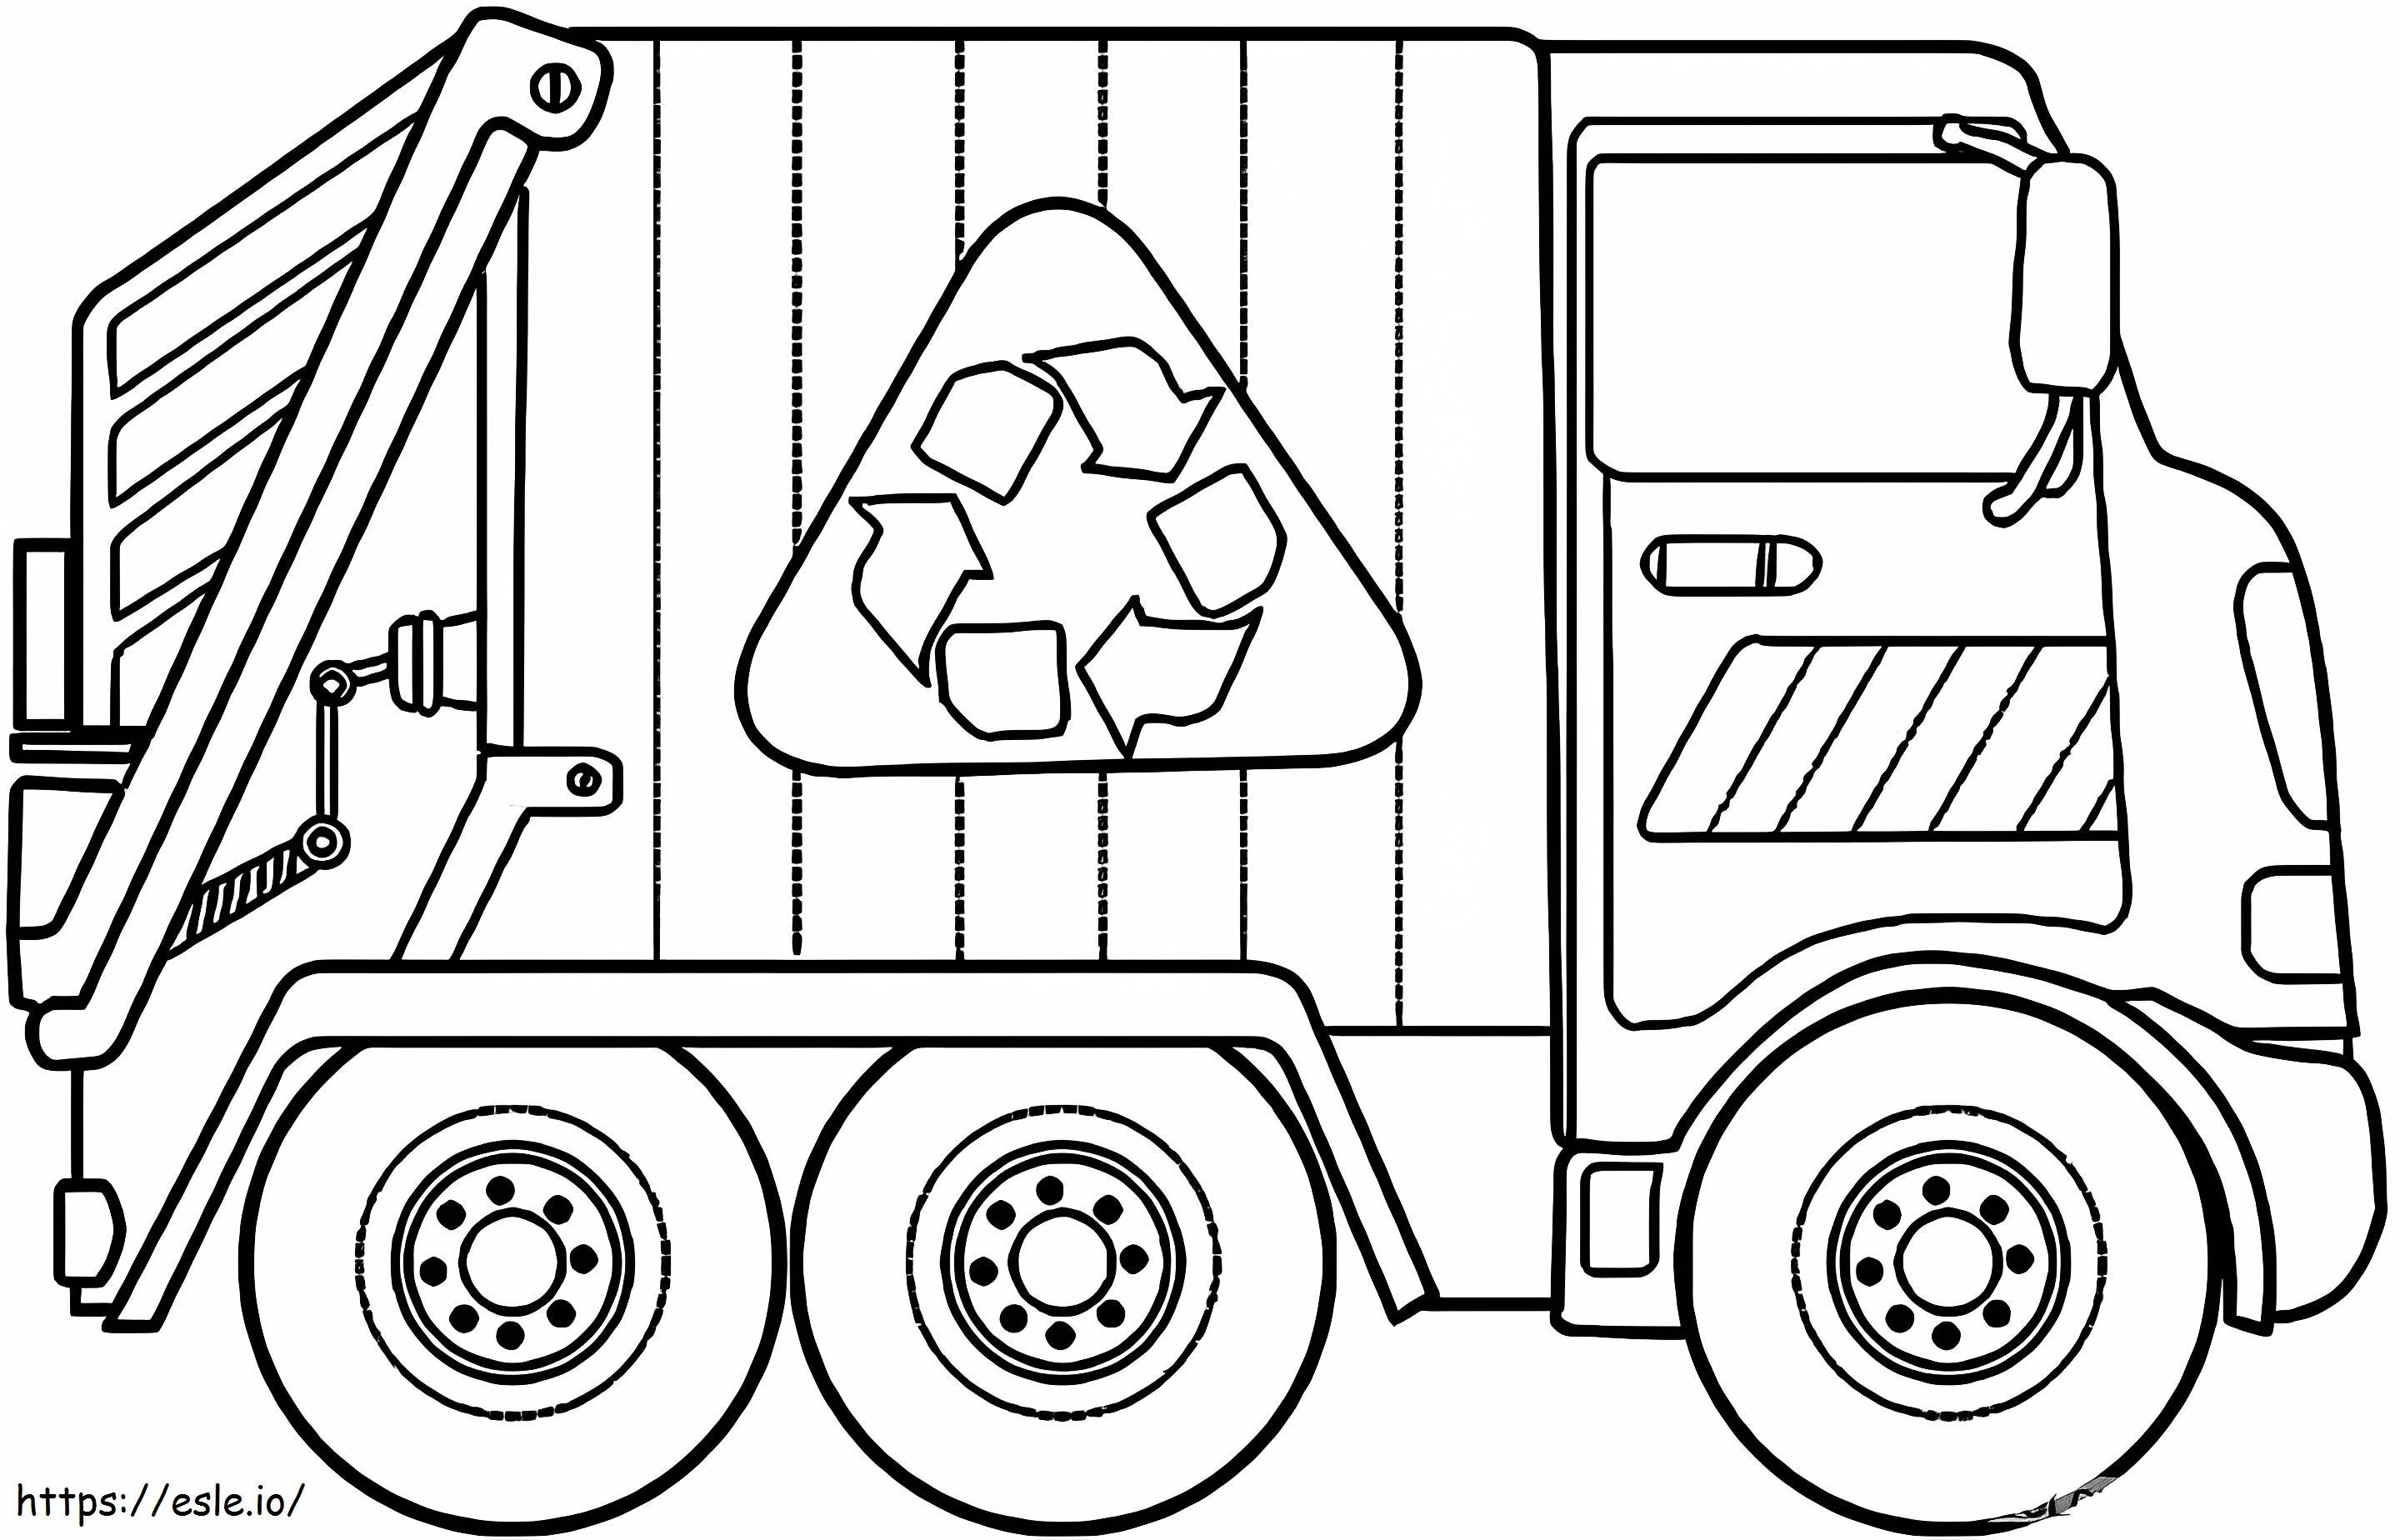 Perfect Garbage Truck coloring page